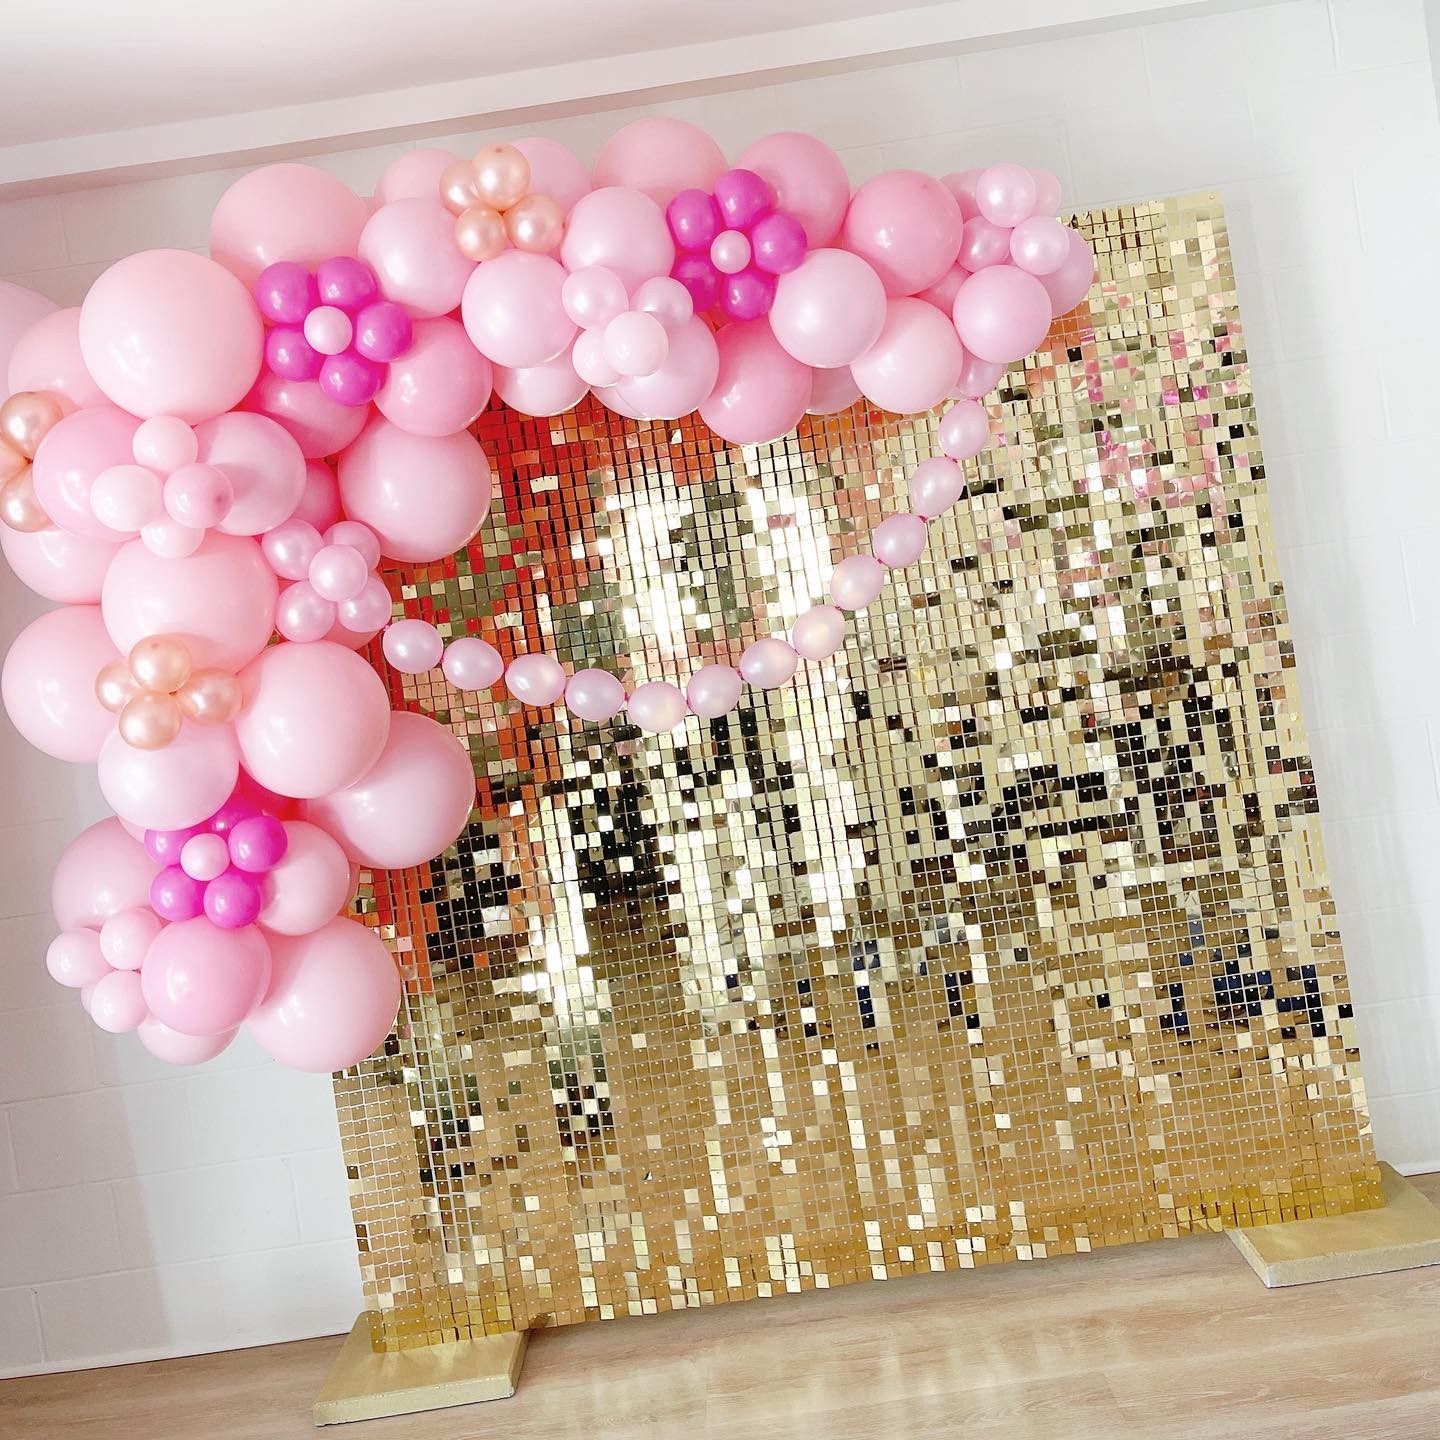 Give us all the PINK! 💕💕💕

Featuring:
- 7x7 sequin wall rental 
- 8 ft. Garland 

#sequinwall #shimmerwall #pinkballoons #balloongarland #eventplanner #eventstylist #partydecorations #partystylist